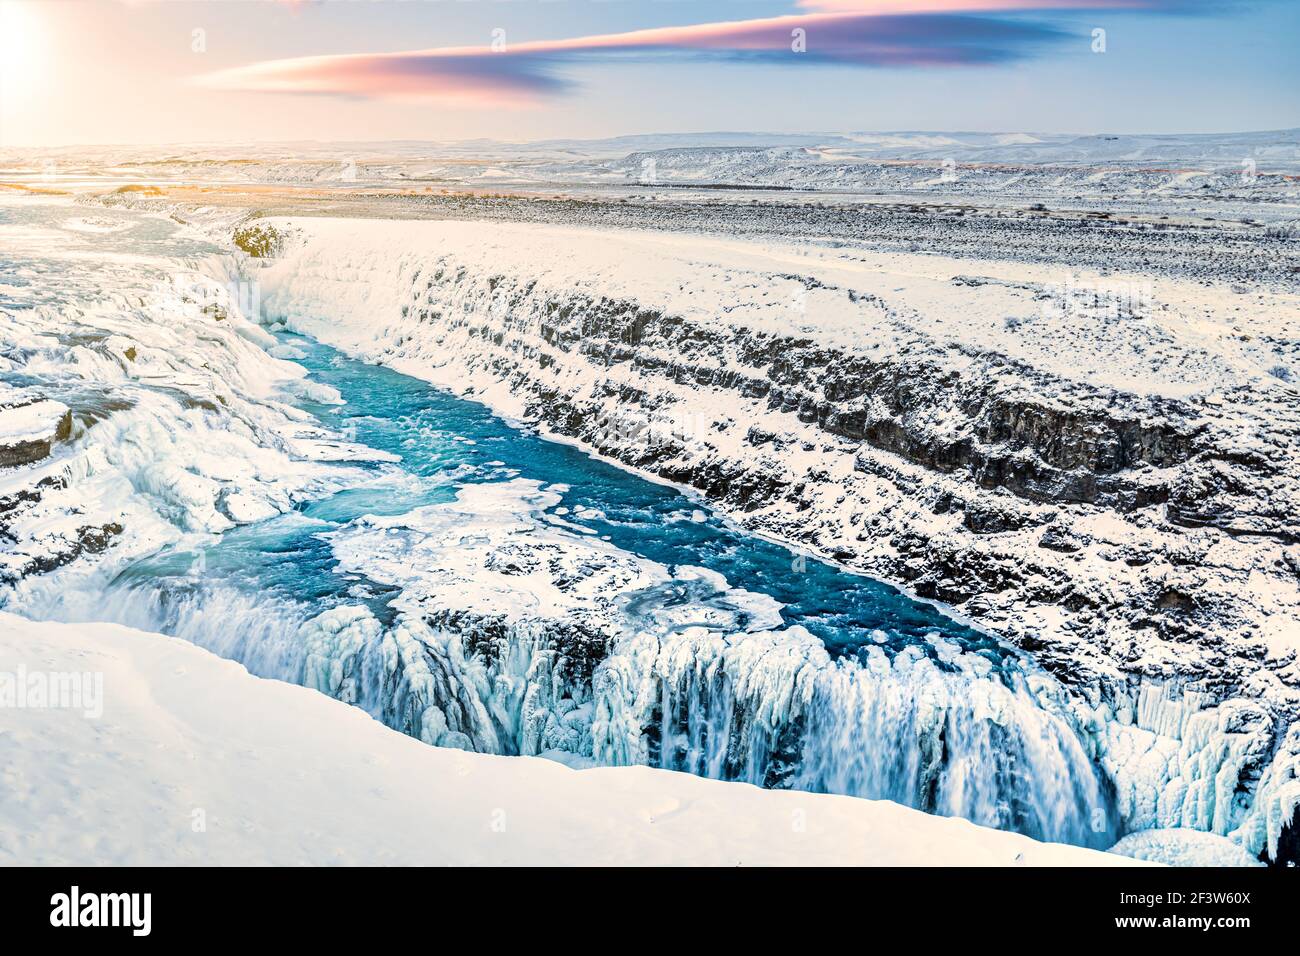 Gullfoss waterfall during winter, in Iceland. Gullfoss is one of the most popular tourist attractions in Iceland. Stock Photo